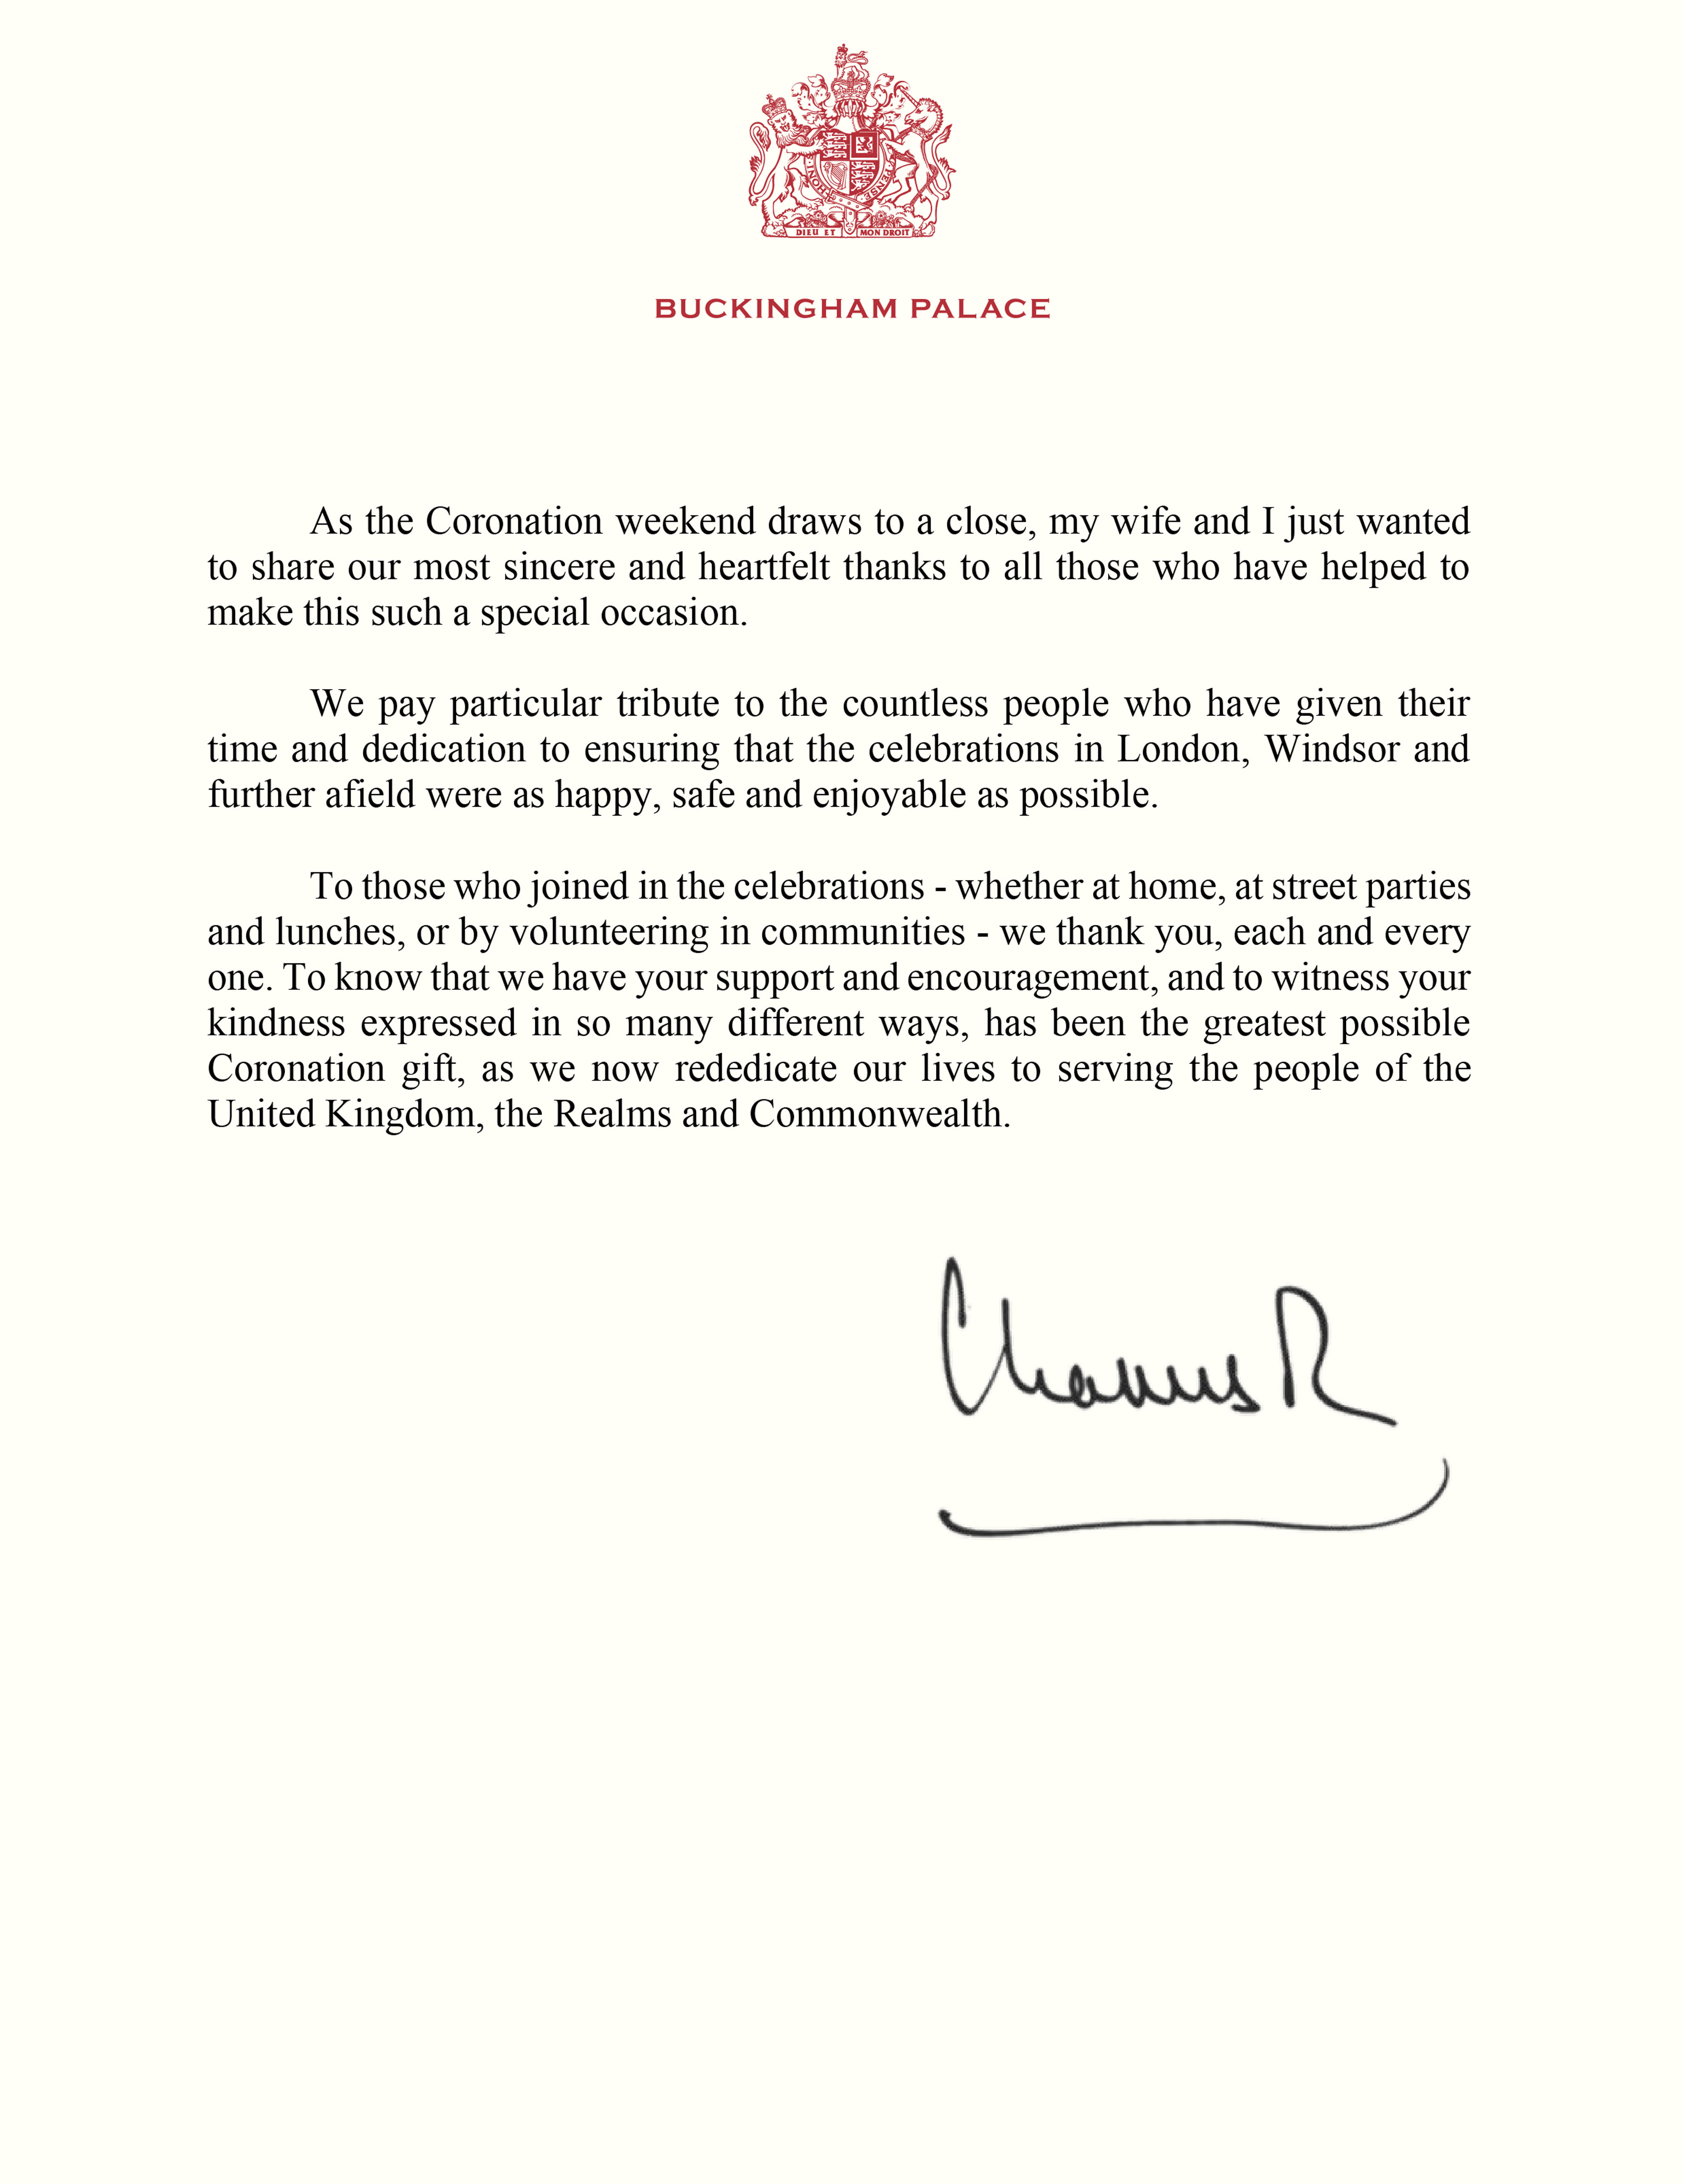 The King's coronation message